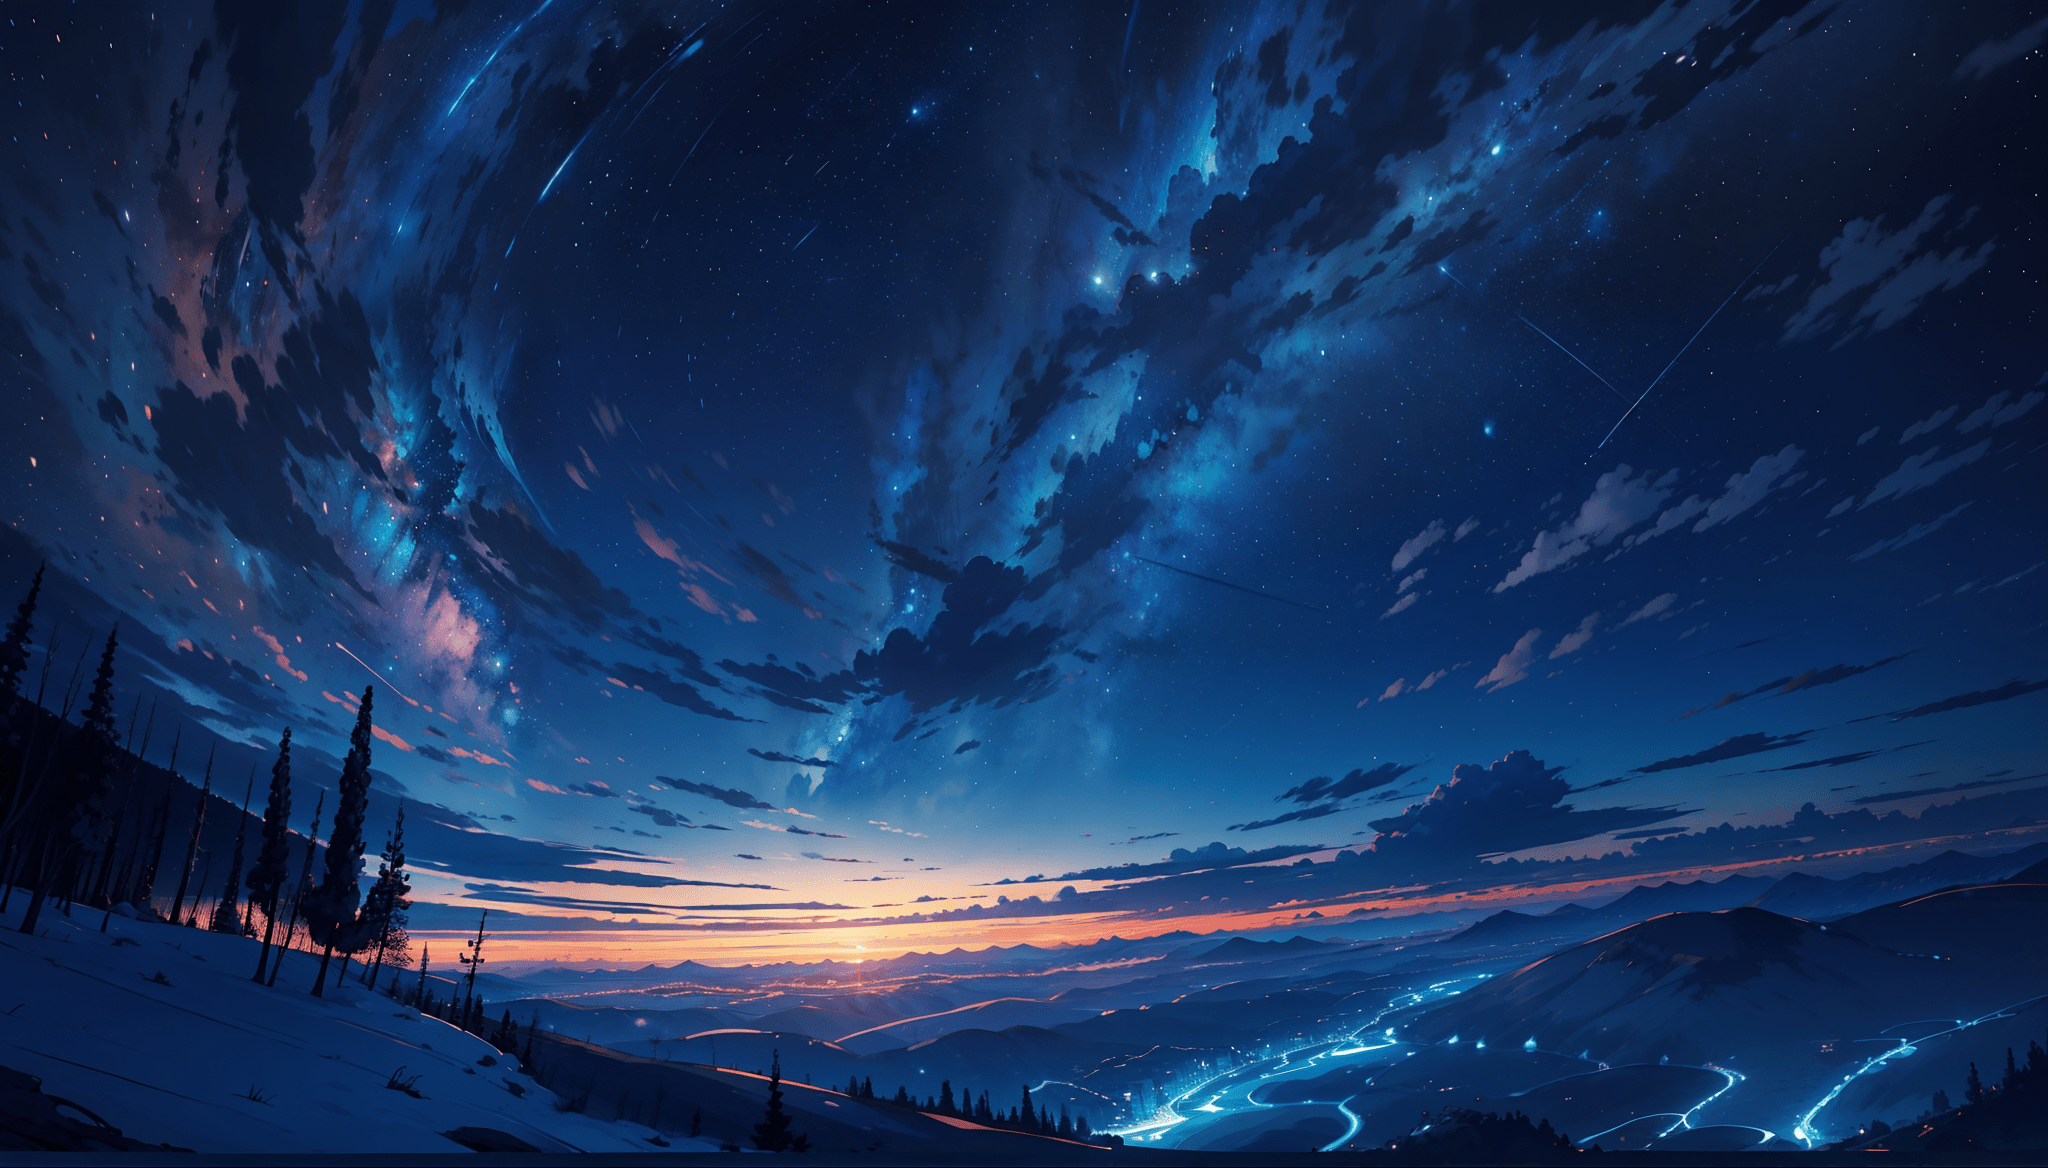 The picture shows a beautiful night sky, with stars shining in the dark blue sky, and a few white clouds floating in the sky. - Scenery